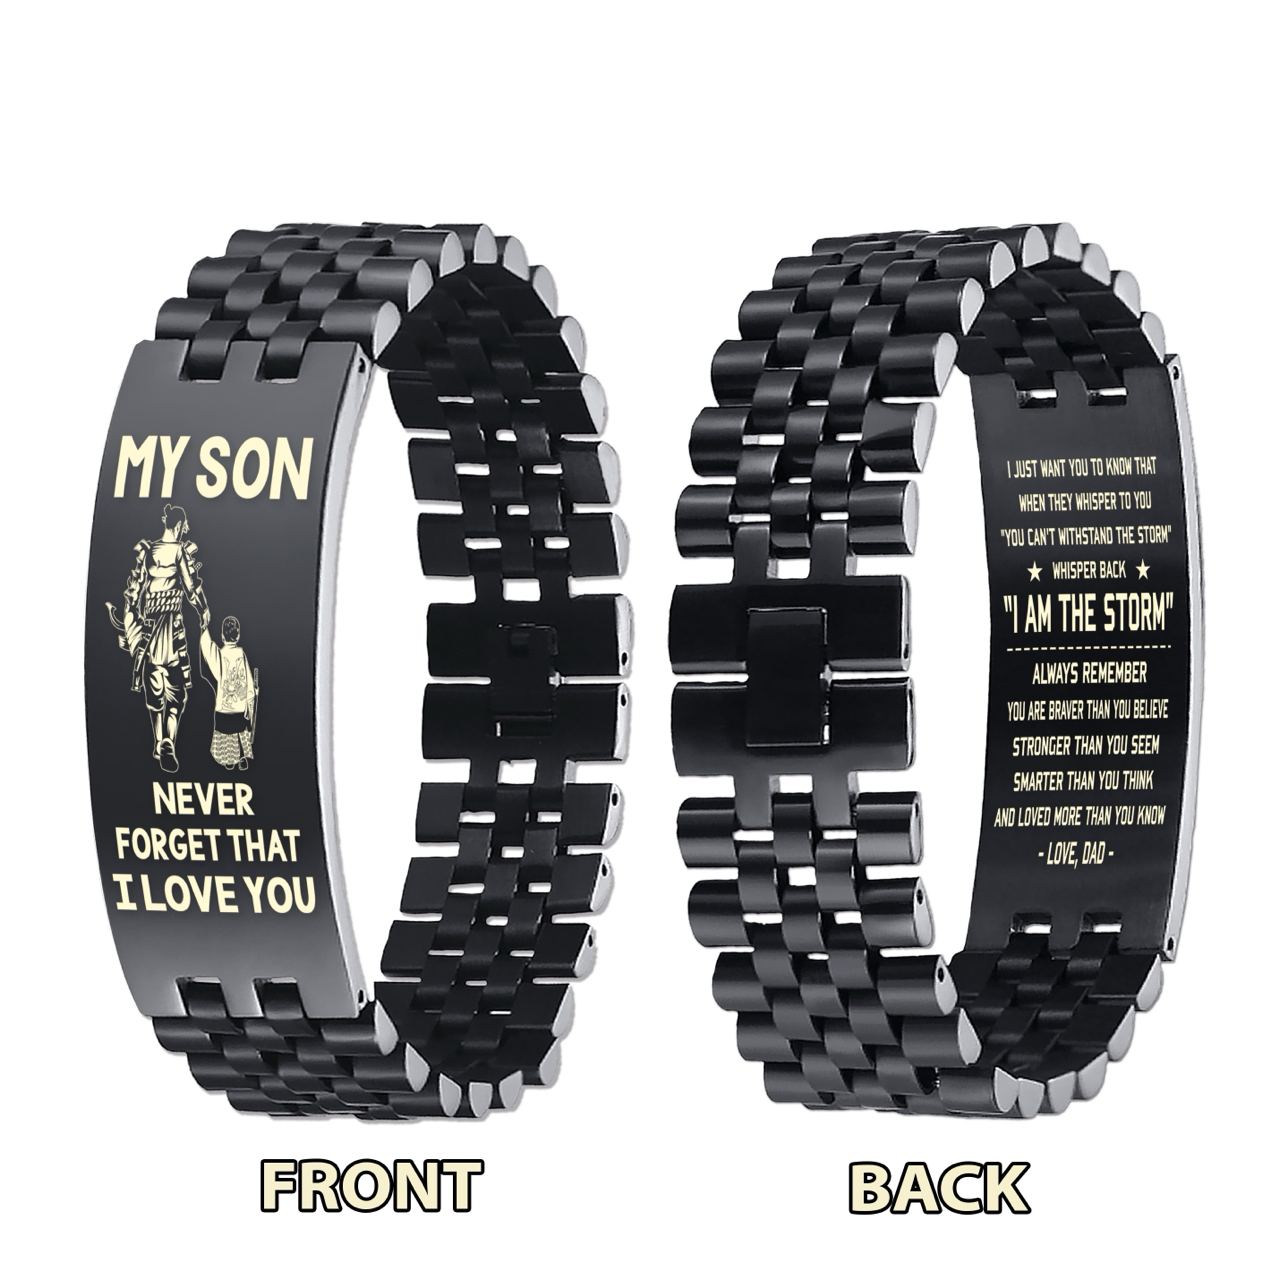 Samurai engraved bracelet, gifts from dad mom to son, I am the storm